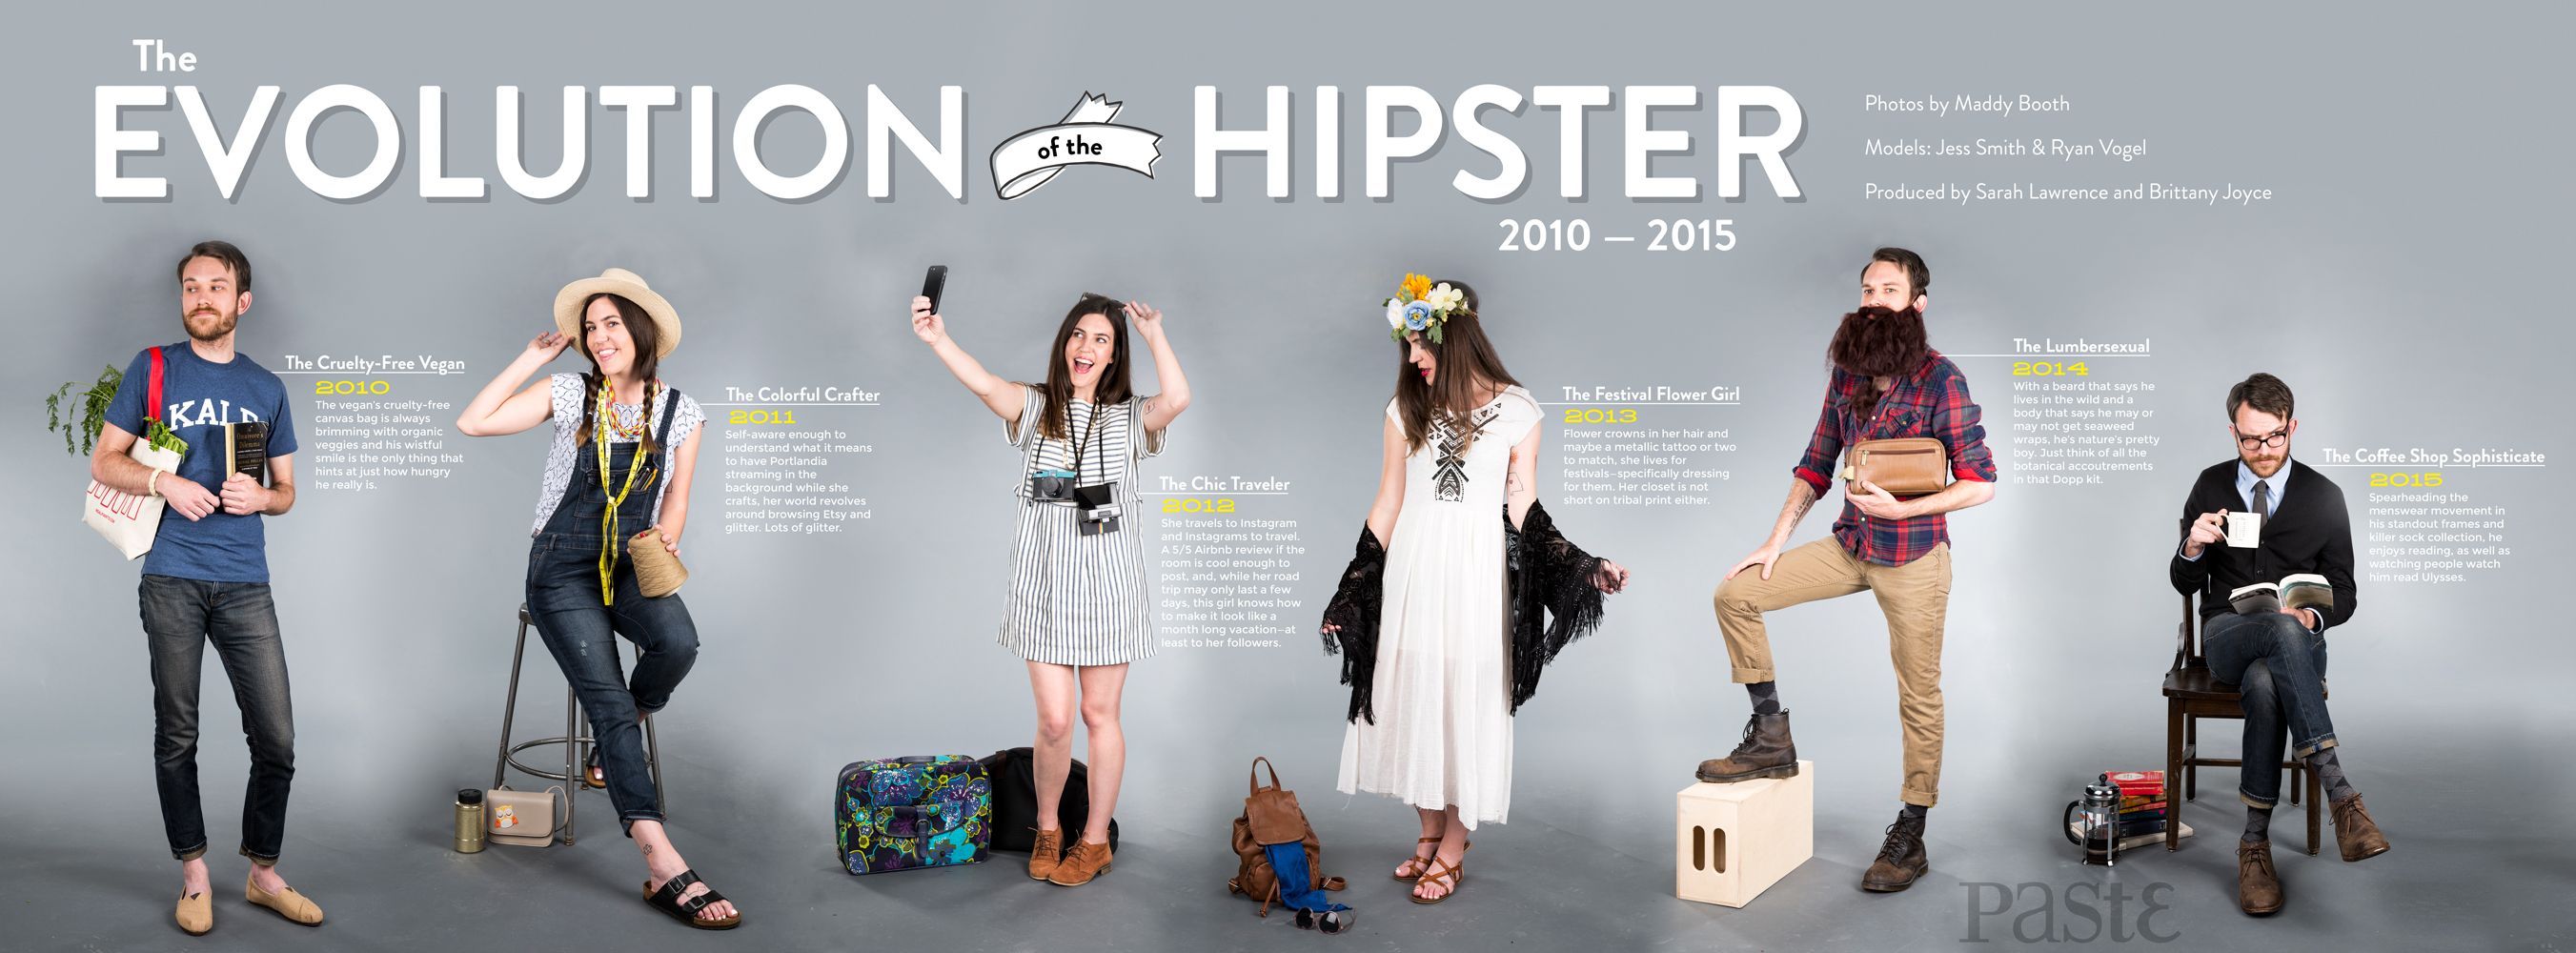 evolution-of-the-hipster